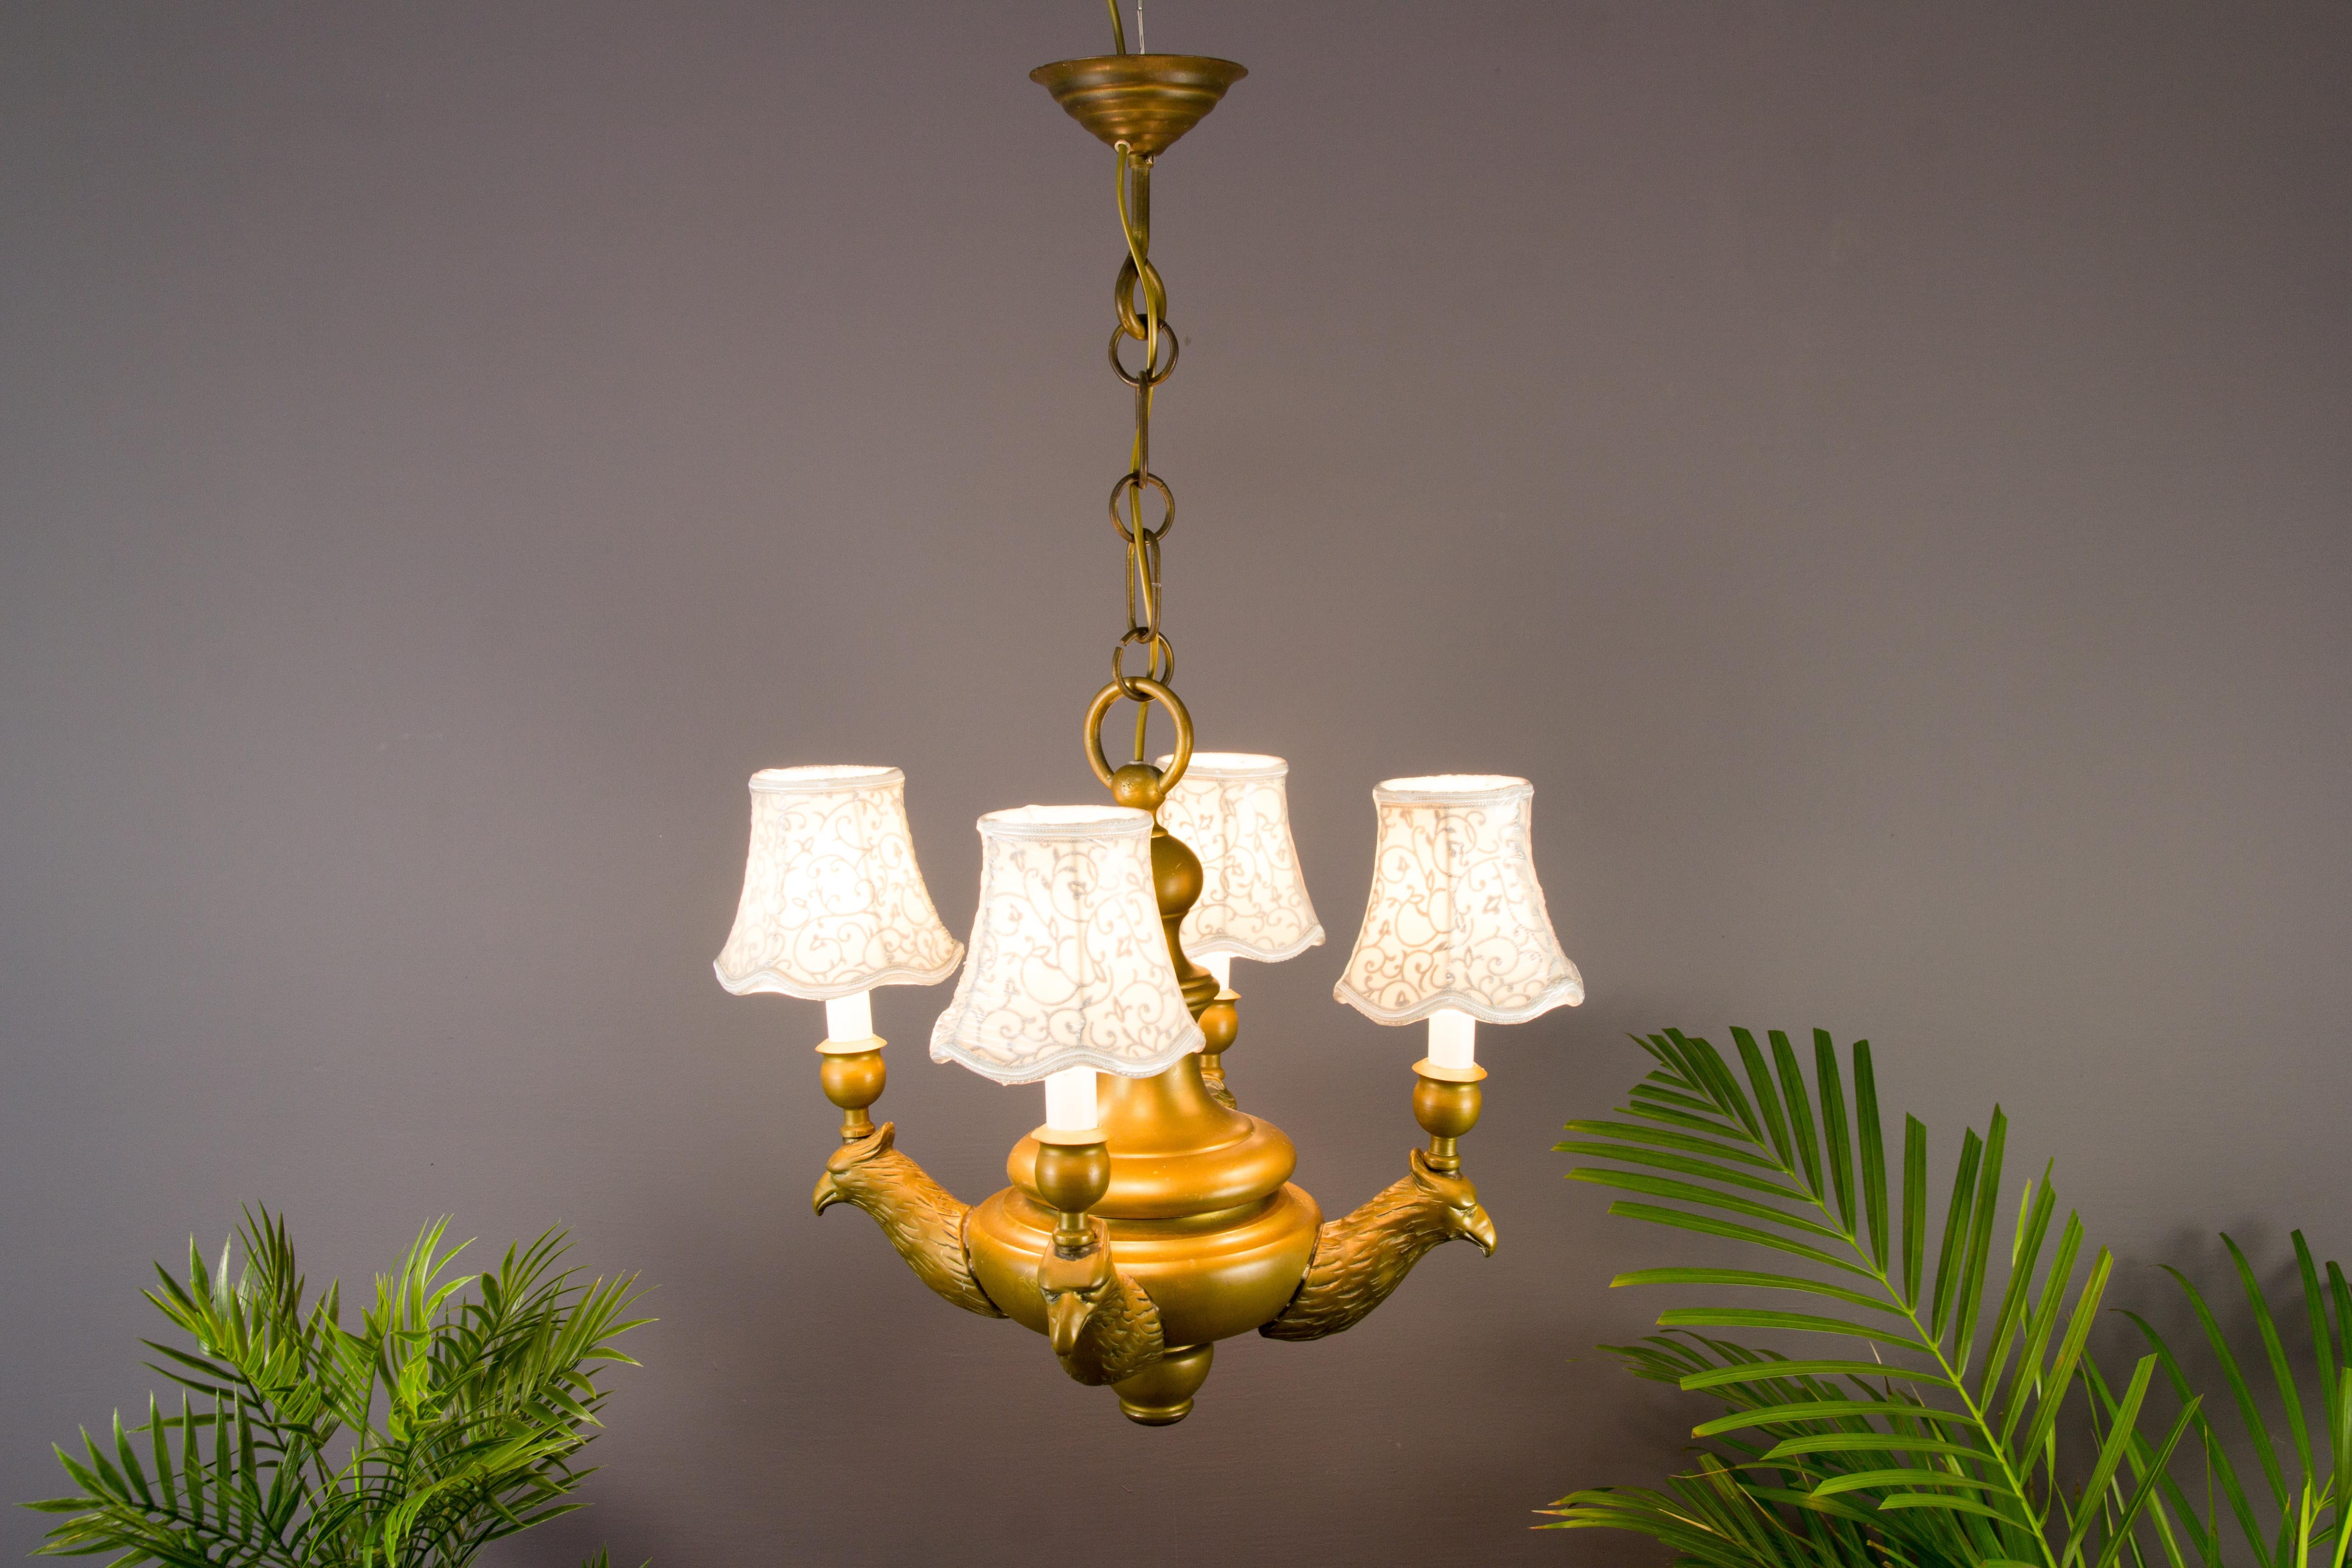 Wonderful bronze four-light chandelier from circa the 1930s. Four beautifully made eagle heads are holding lights with sockets for E 14 light bulbs and a small (new) fabric lampshade.
Dimensions: Diameter: 40 cm / 15.74 in; height: 75 cm / 29.52